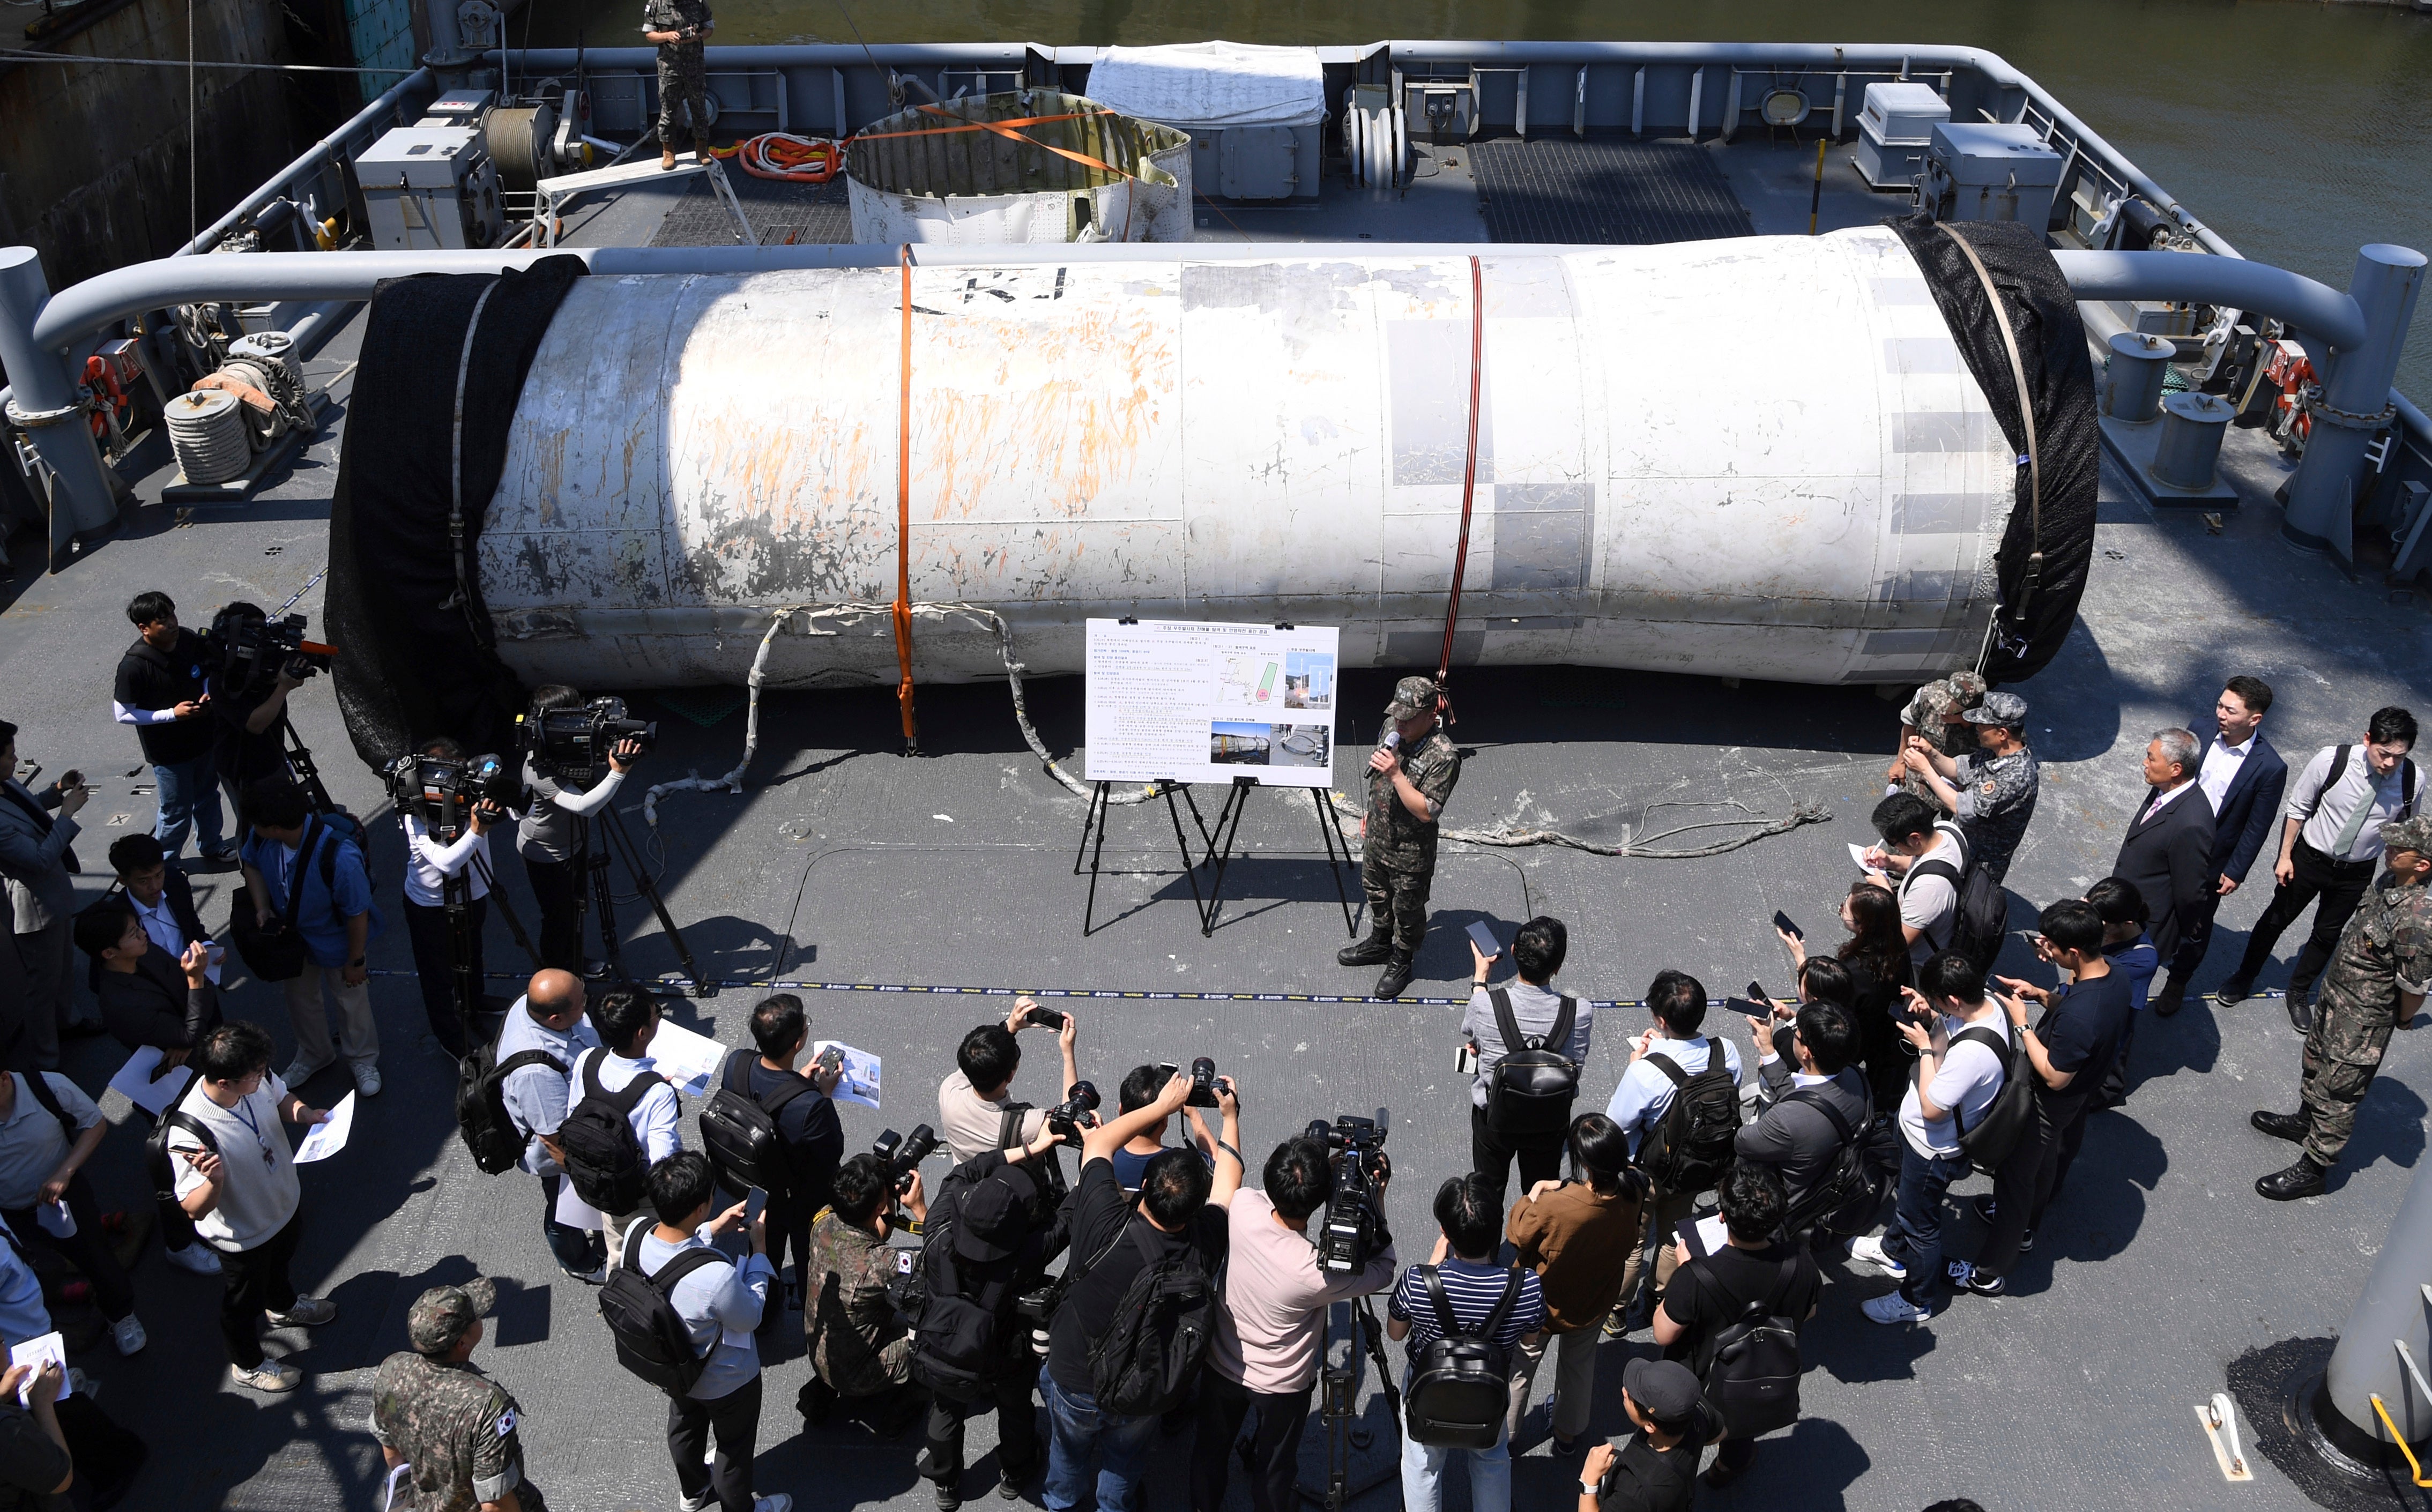 Objects salvaged by South Korea's military that are presumed to be parts of the North Korean space-launch vehicle that crashed into sea following a launch failure, are displayed